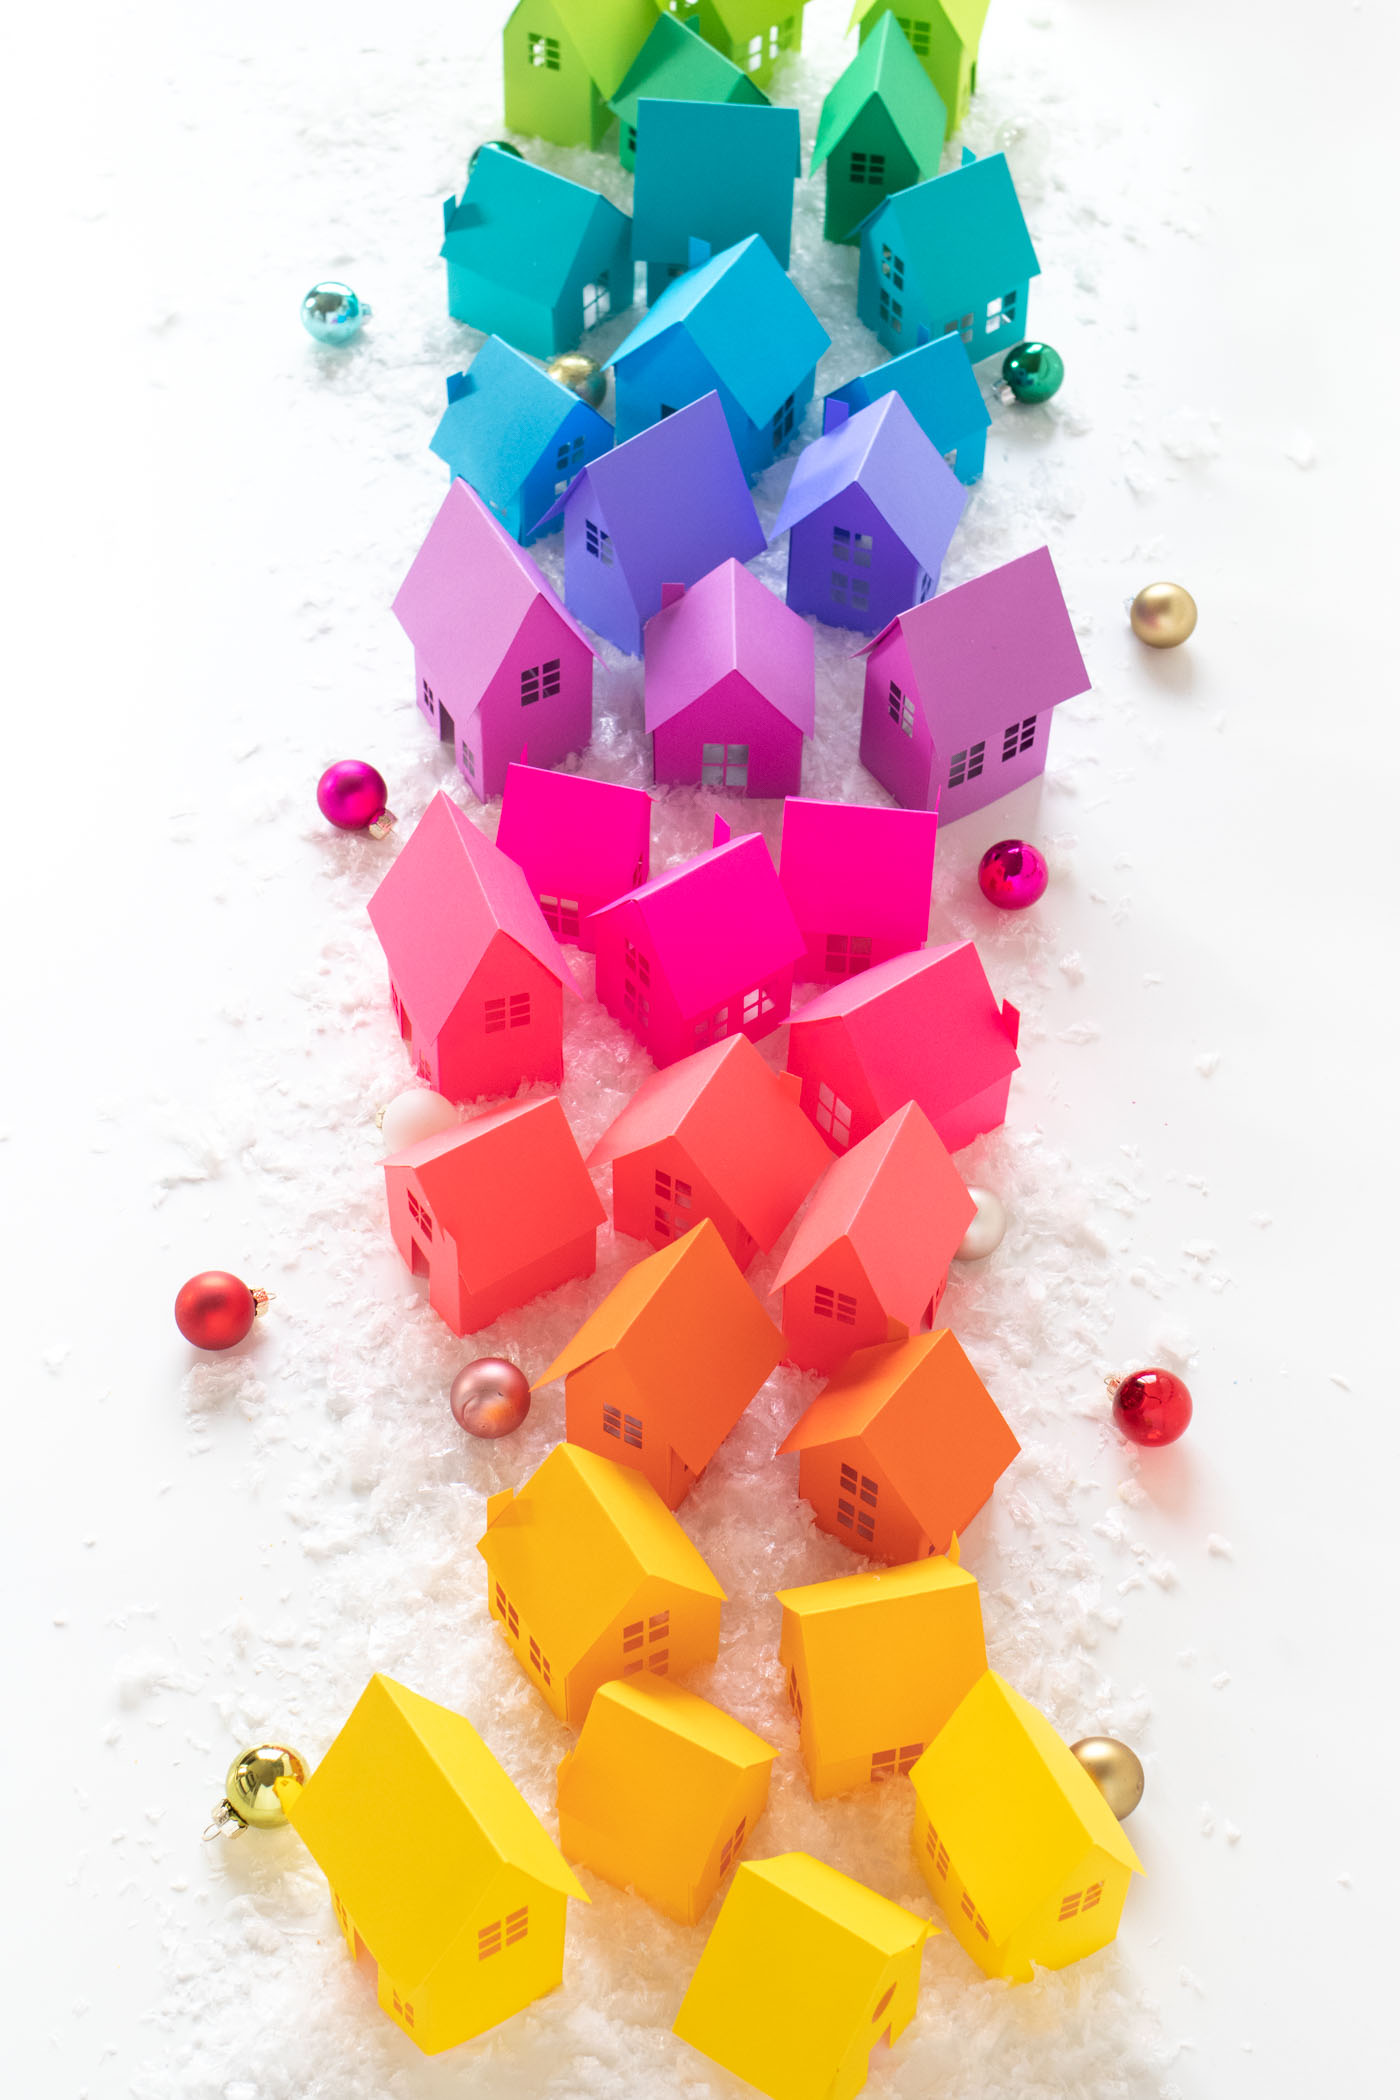 Rainbow Holiday Village with Paper + Free Templates for Cricut or Silhouette! // Decorate for Christmas with these paper houses made with vibrant Astrobrights cardstock! Turn the holiday village into a rainbow surrounded by fake snow, bottlebrush trees, and LED lights for a festive holiday display! #christmas #christmasdecor #diychristmas #holidayseason #holidaydecor #rainbow #papercrafts #freetemplate #freeprintable